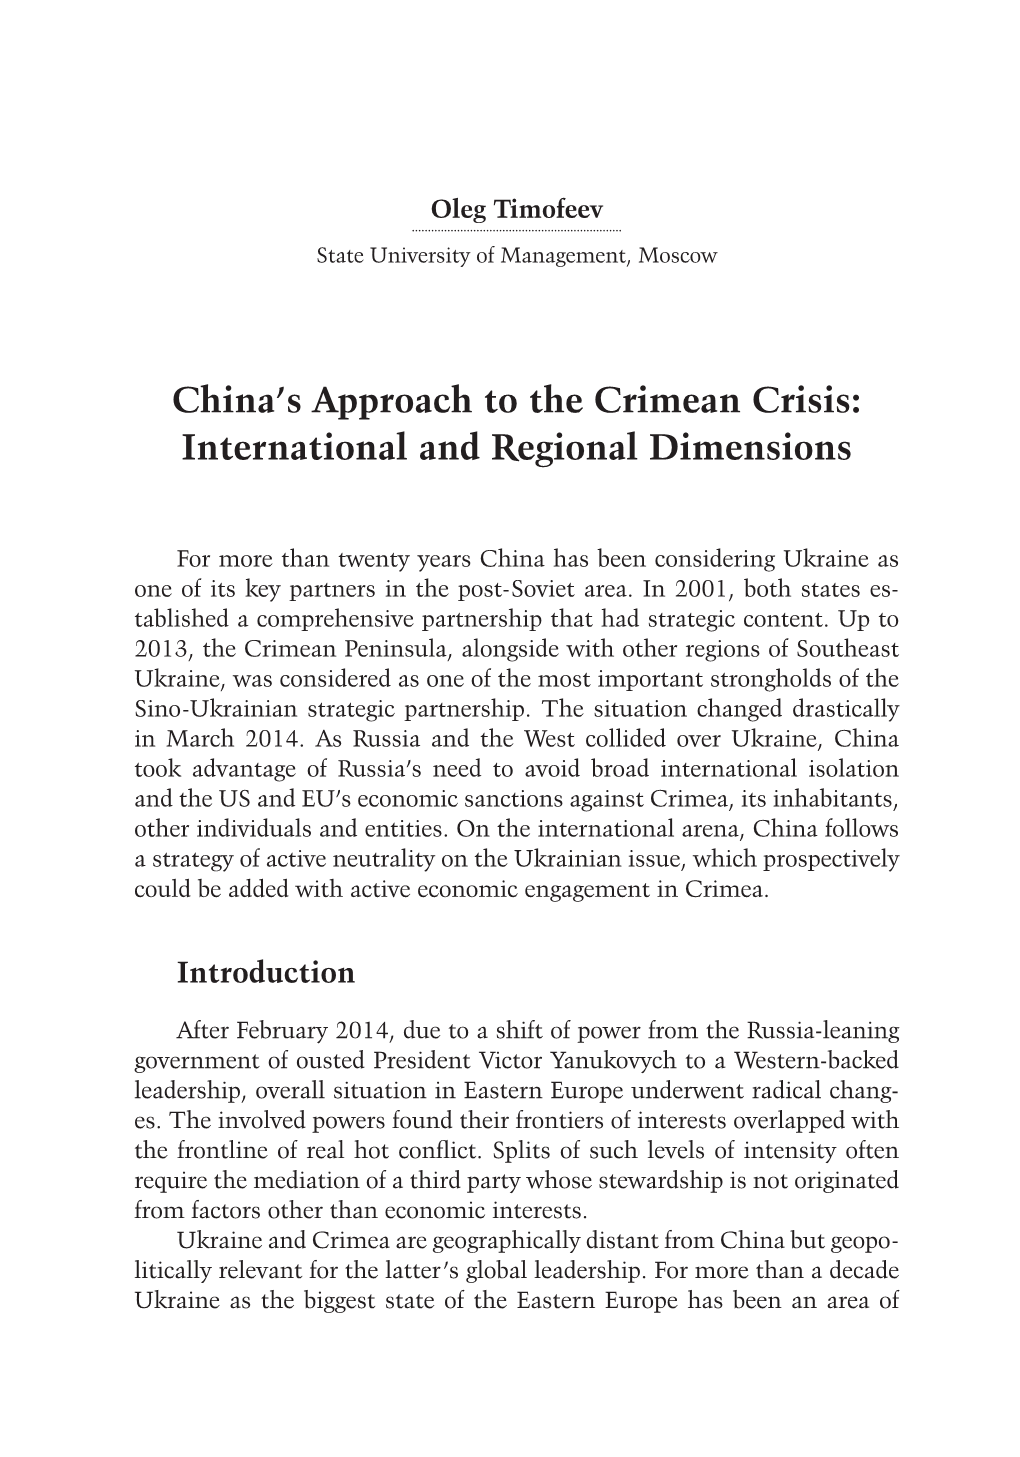 China's Approach to the Crimean Crisis: International and Regional